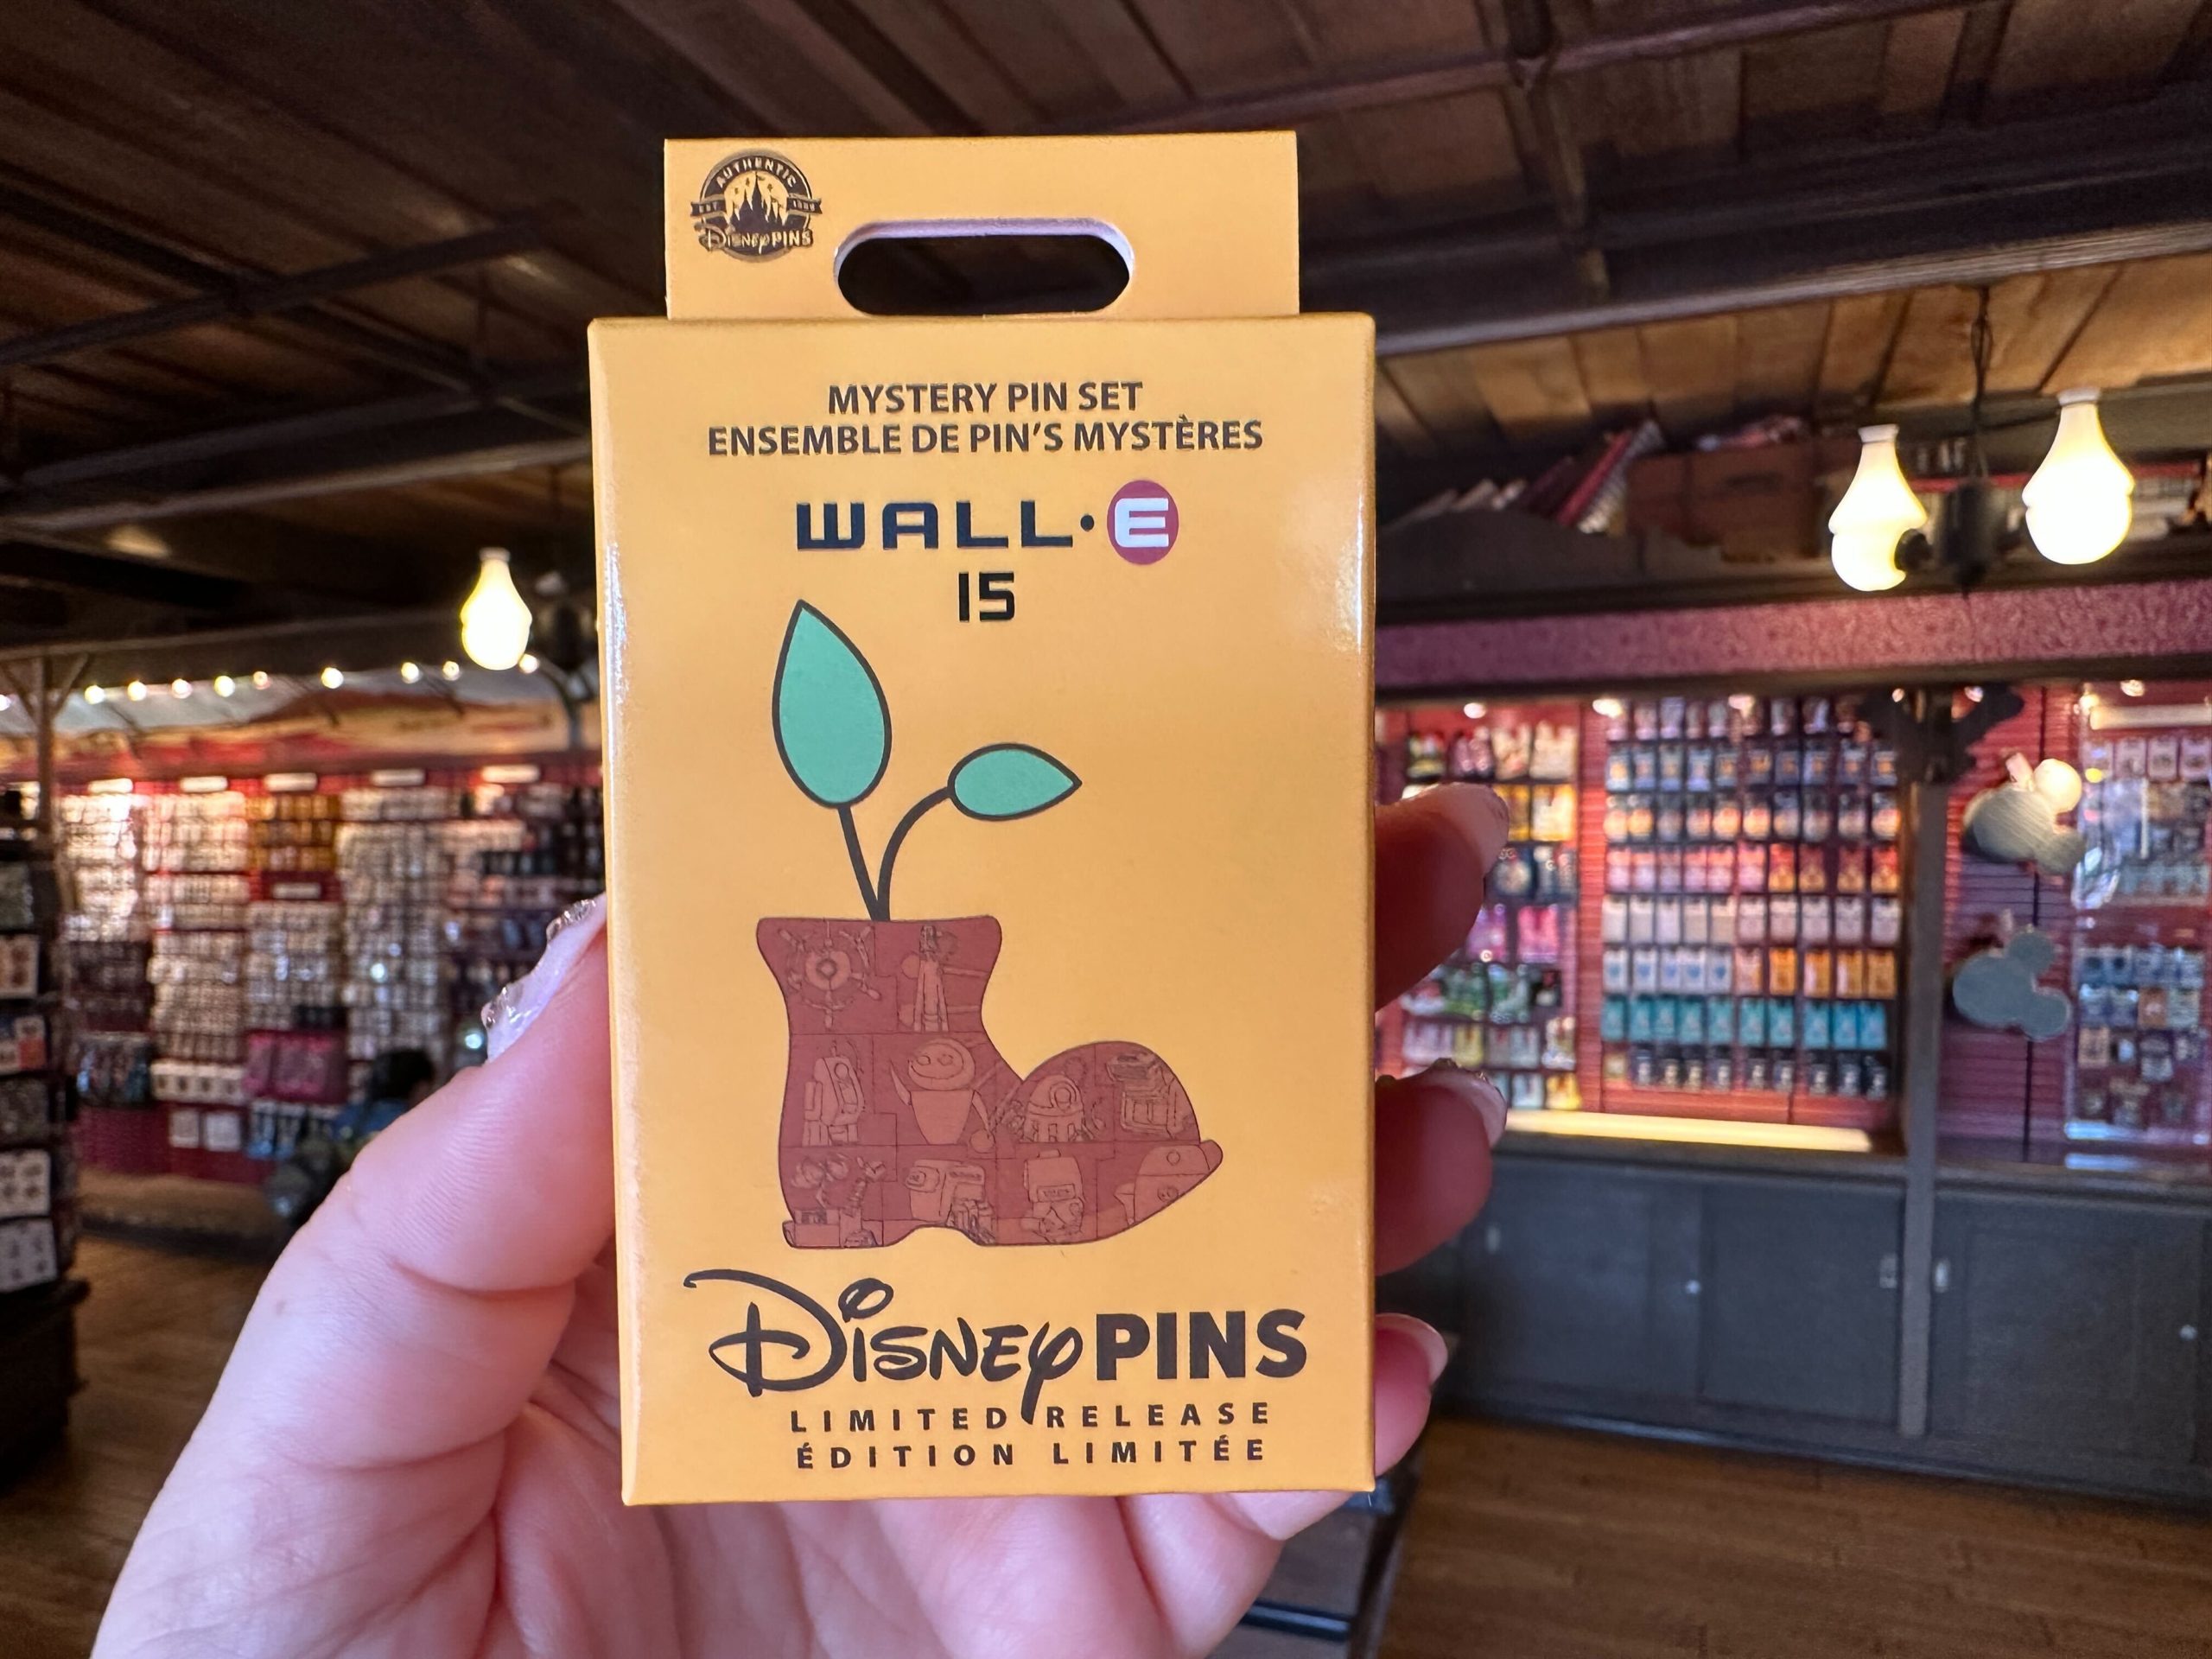 New pin releases at frontier trading post